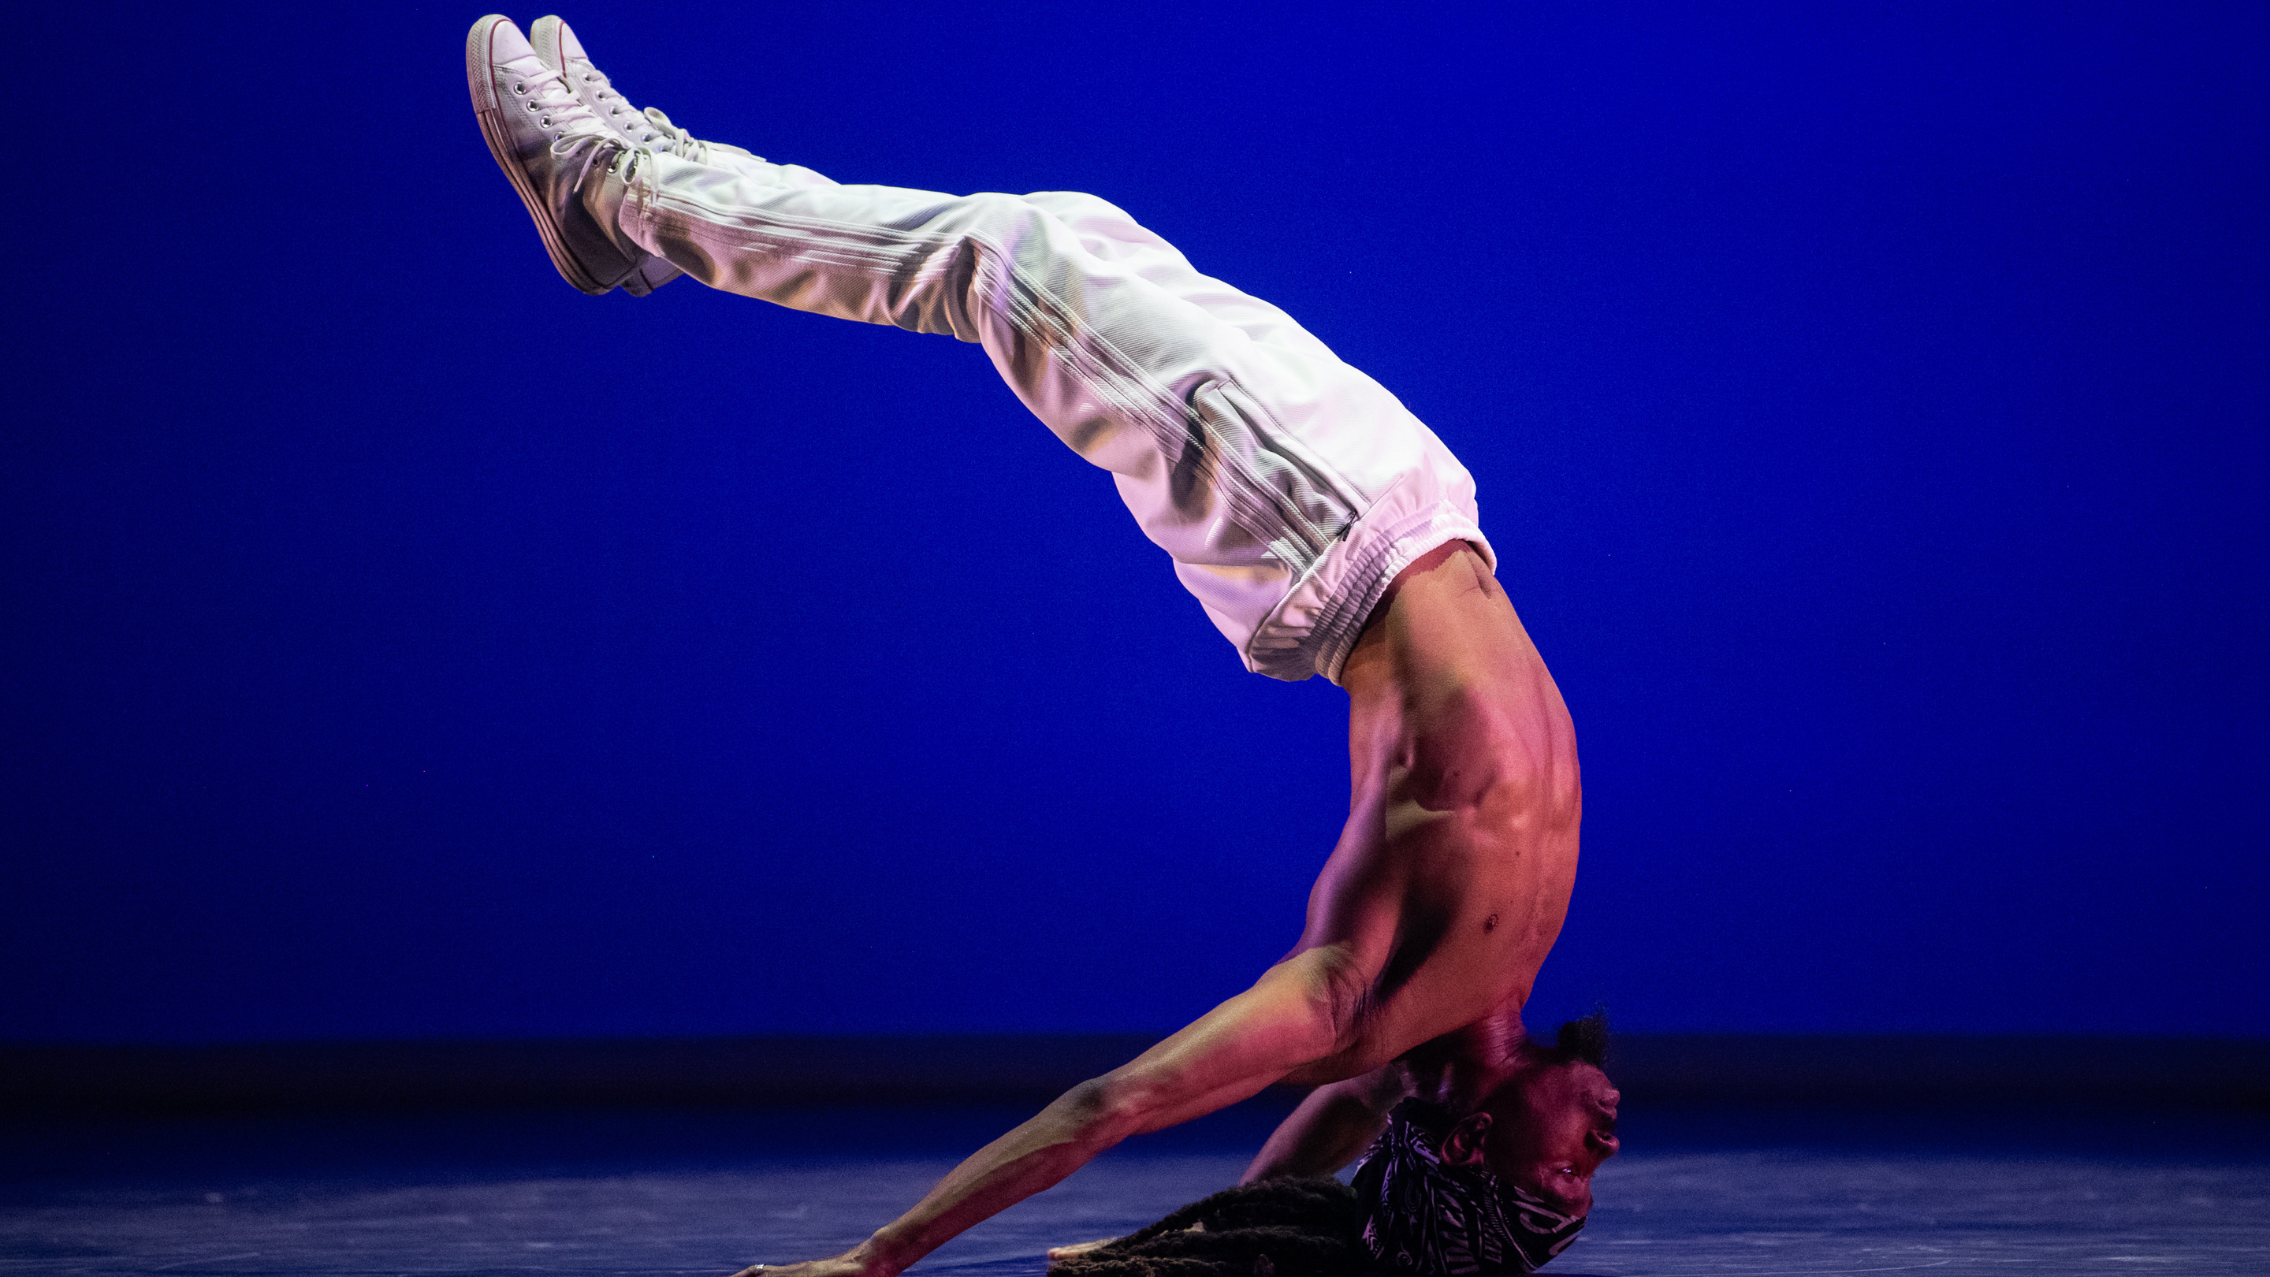 A dancer in white pants does an inverted headstand against a blue backdrop.